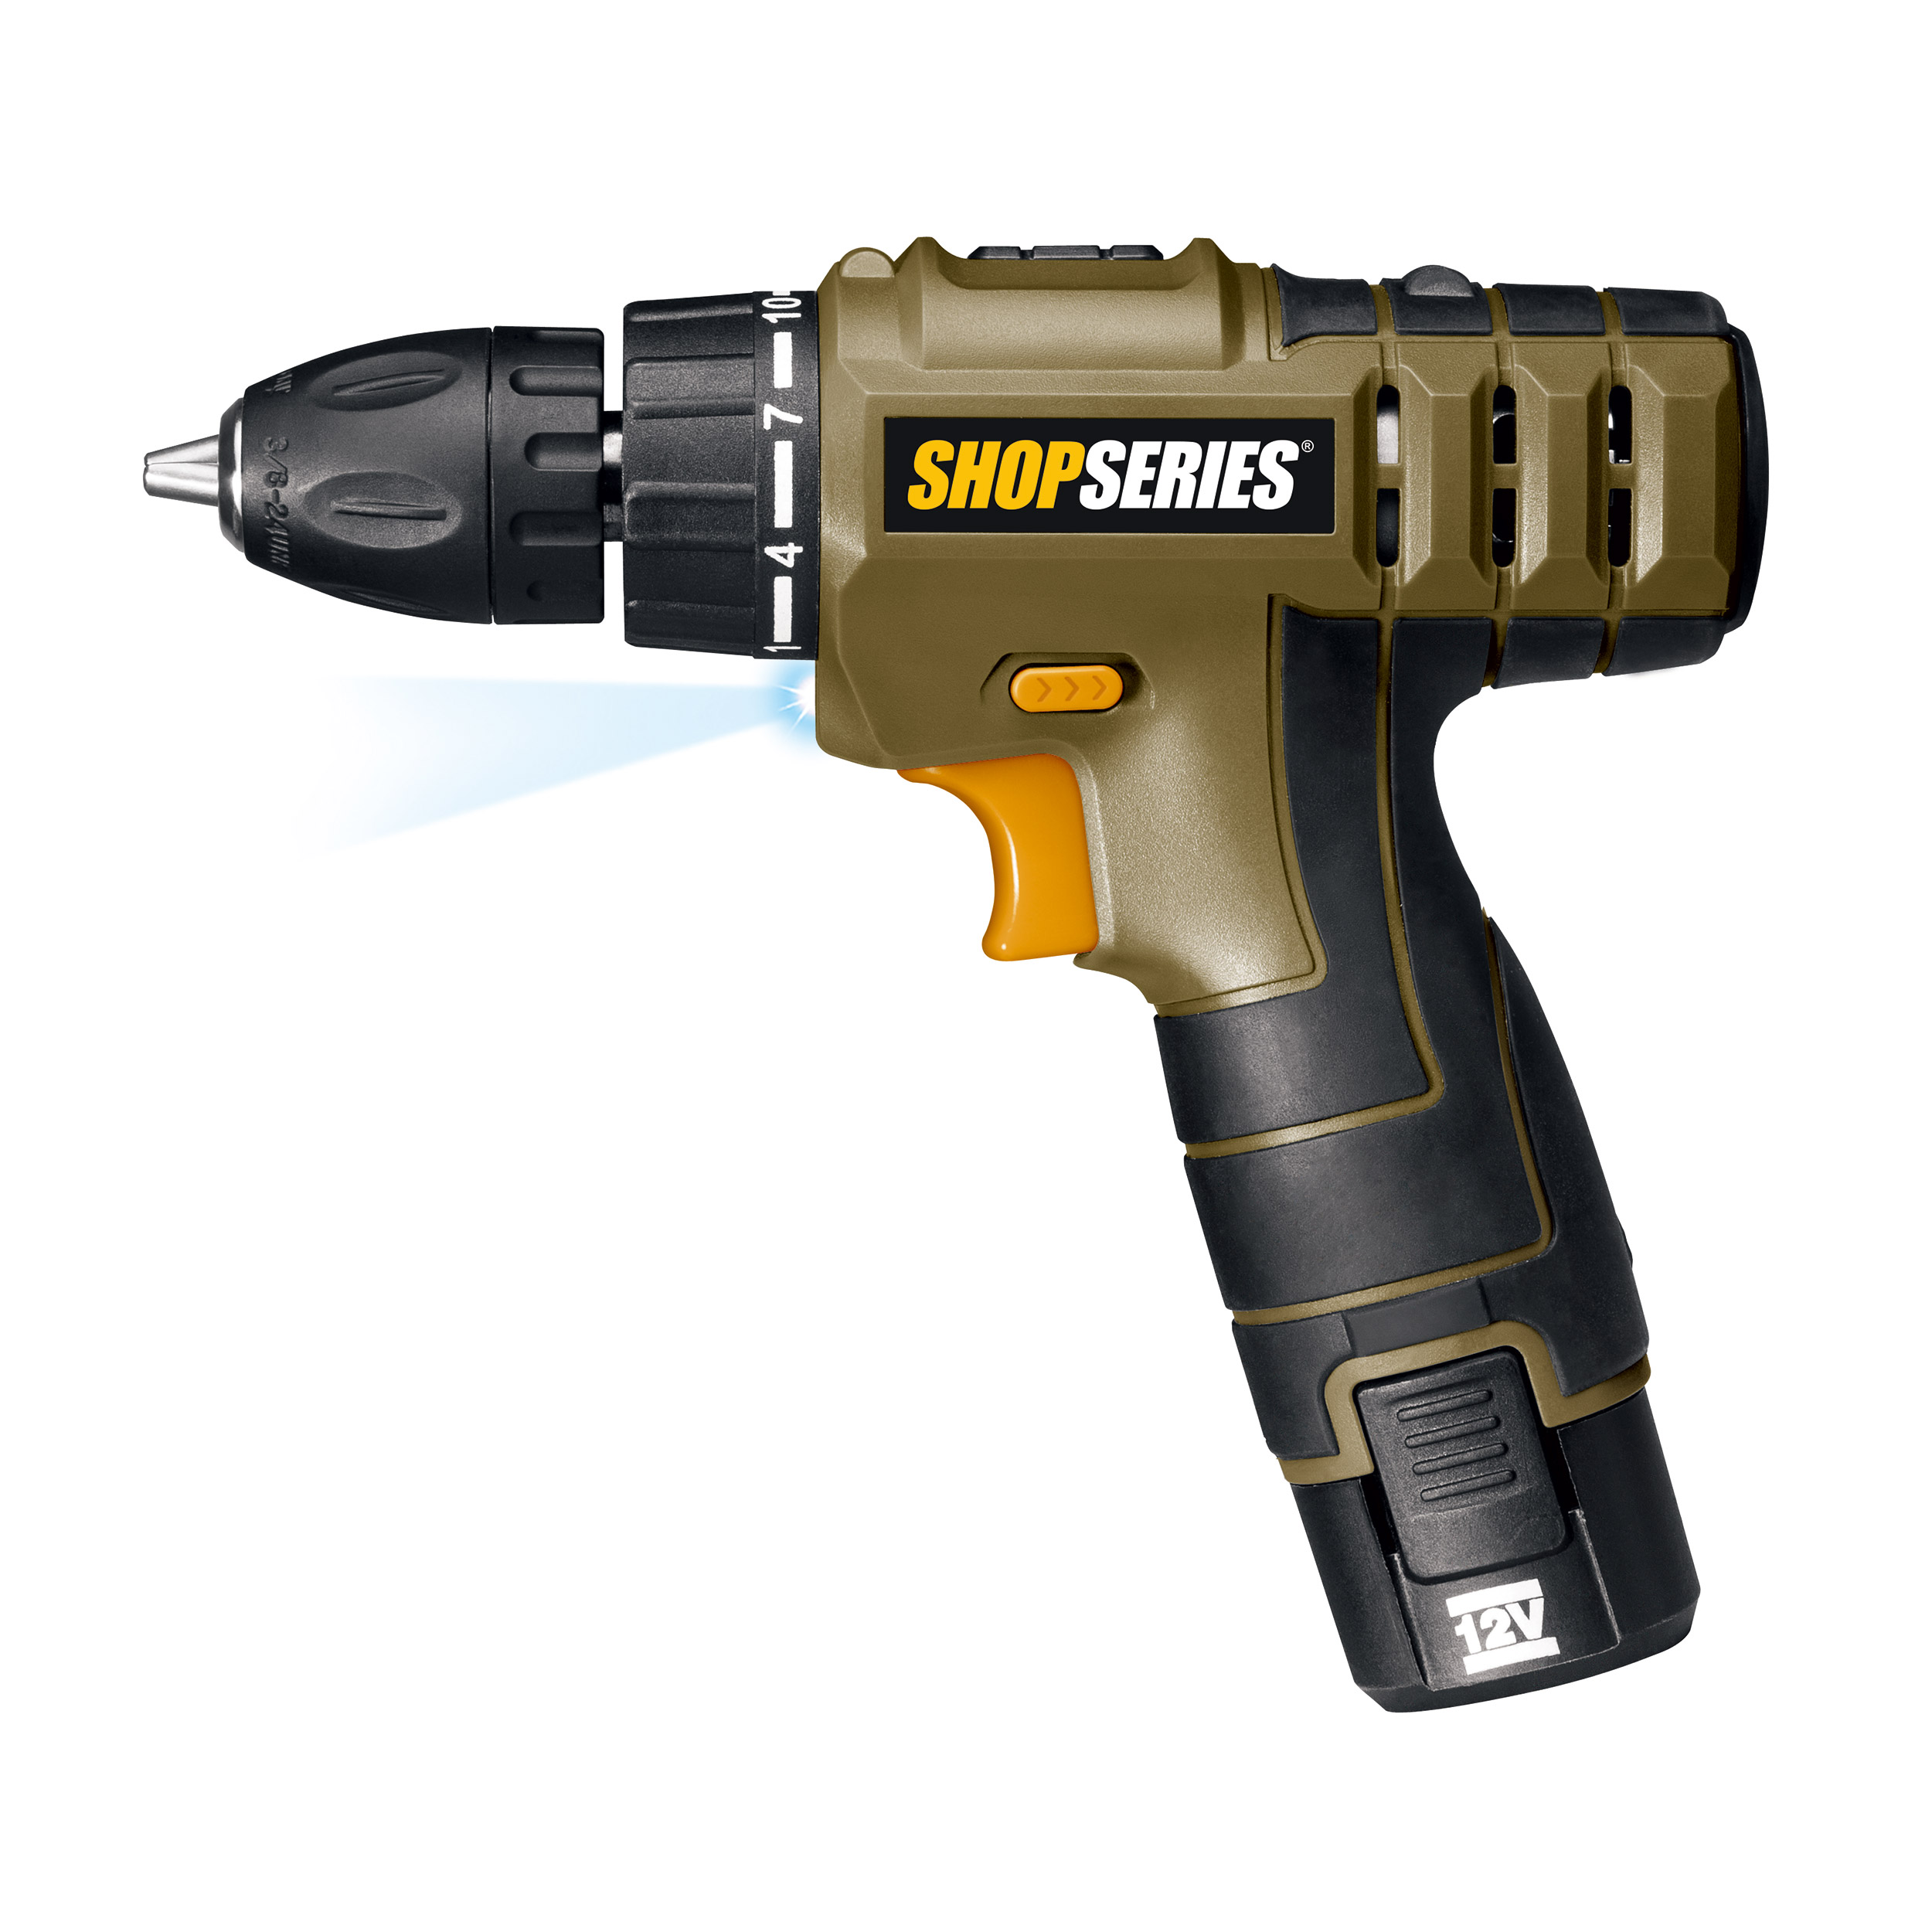 3/8" Drill Driver 12 V Lithium-ion